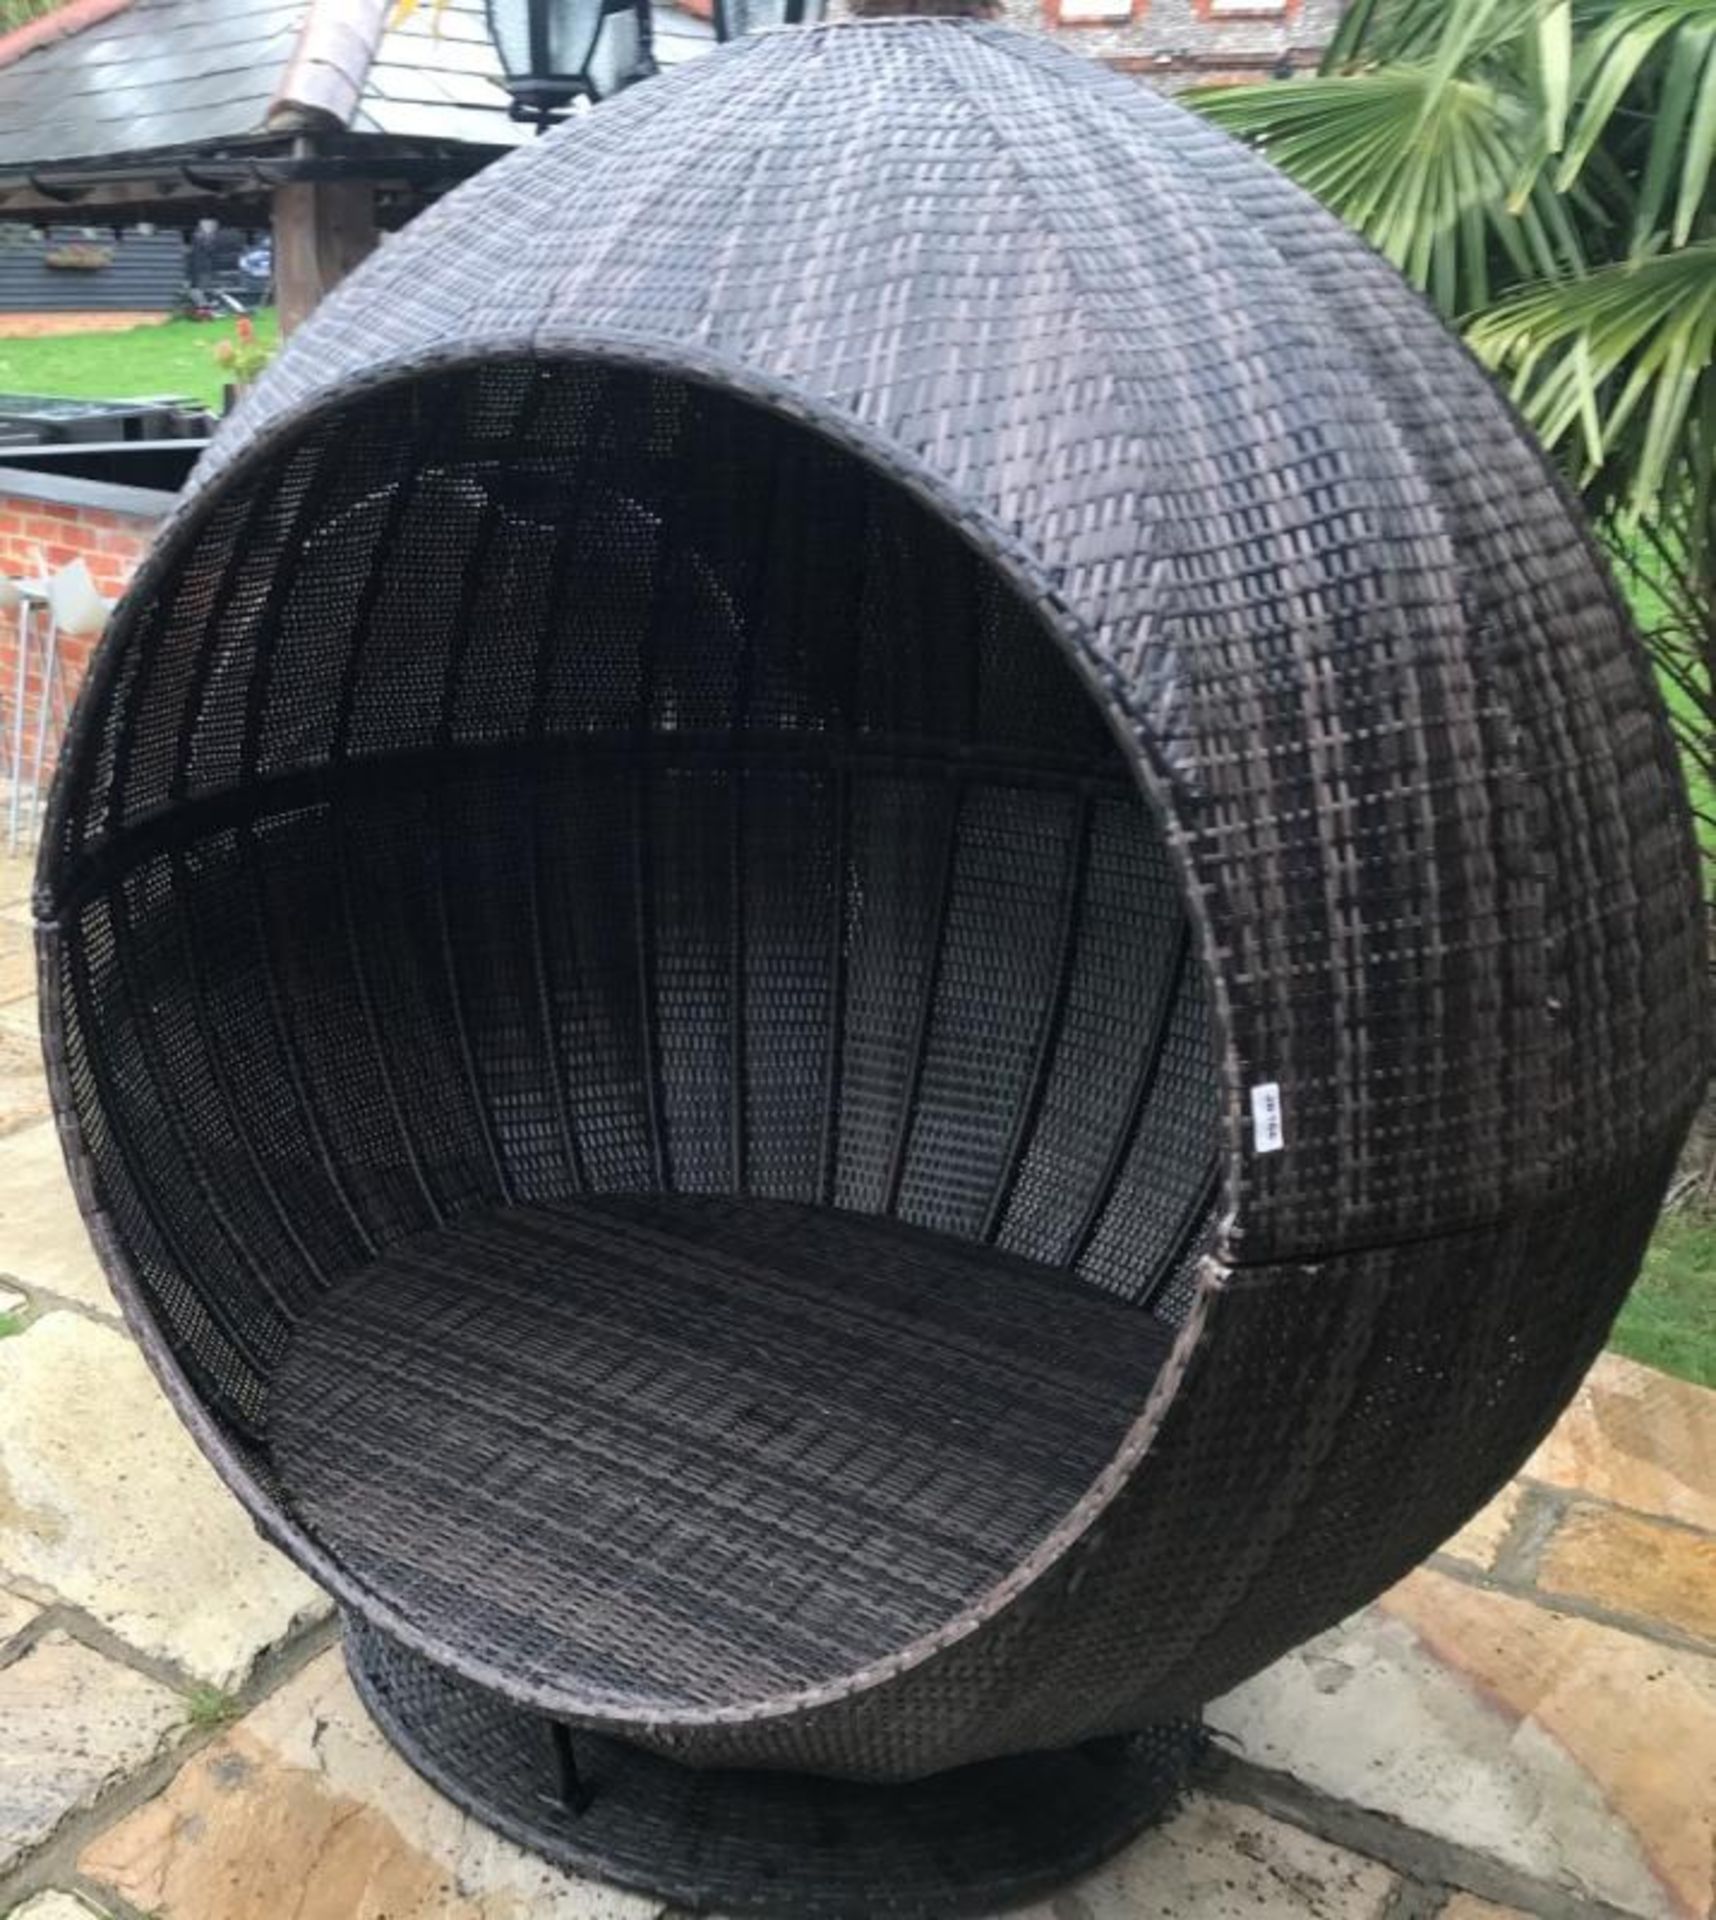 1 x Wicker/rattan Large Egg Shaped Daybed With Large Rounded Cushion Mat - Ref: JB166 - Pre- - Image 2 of 4